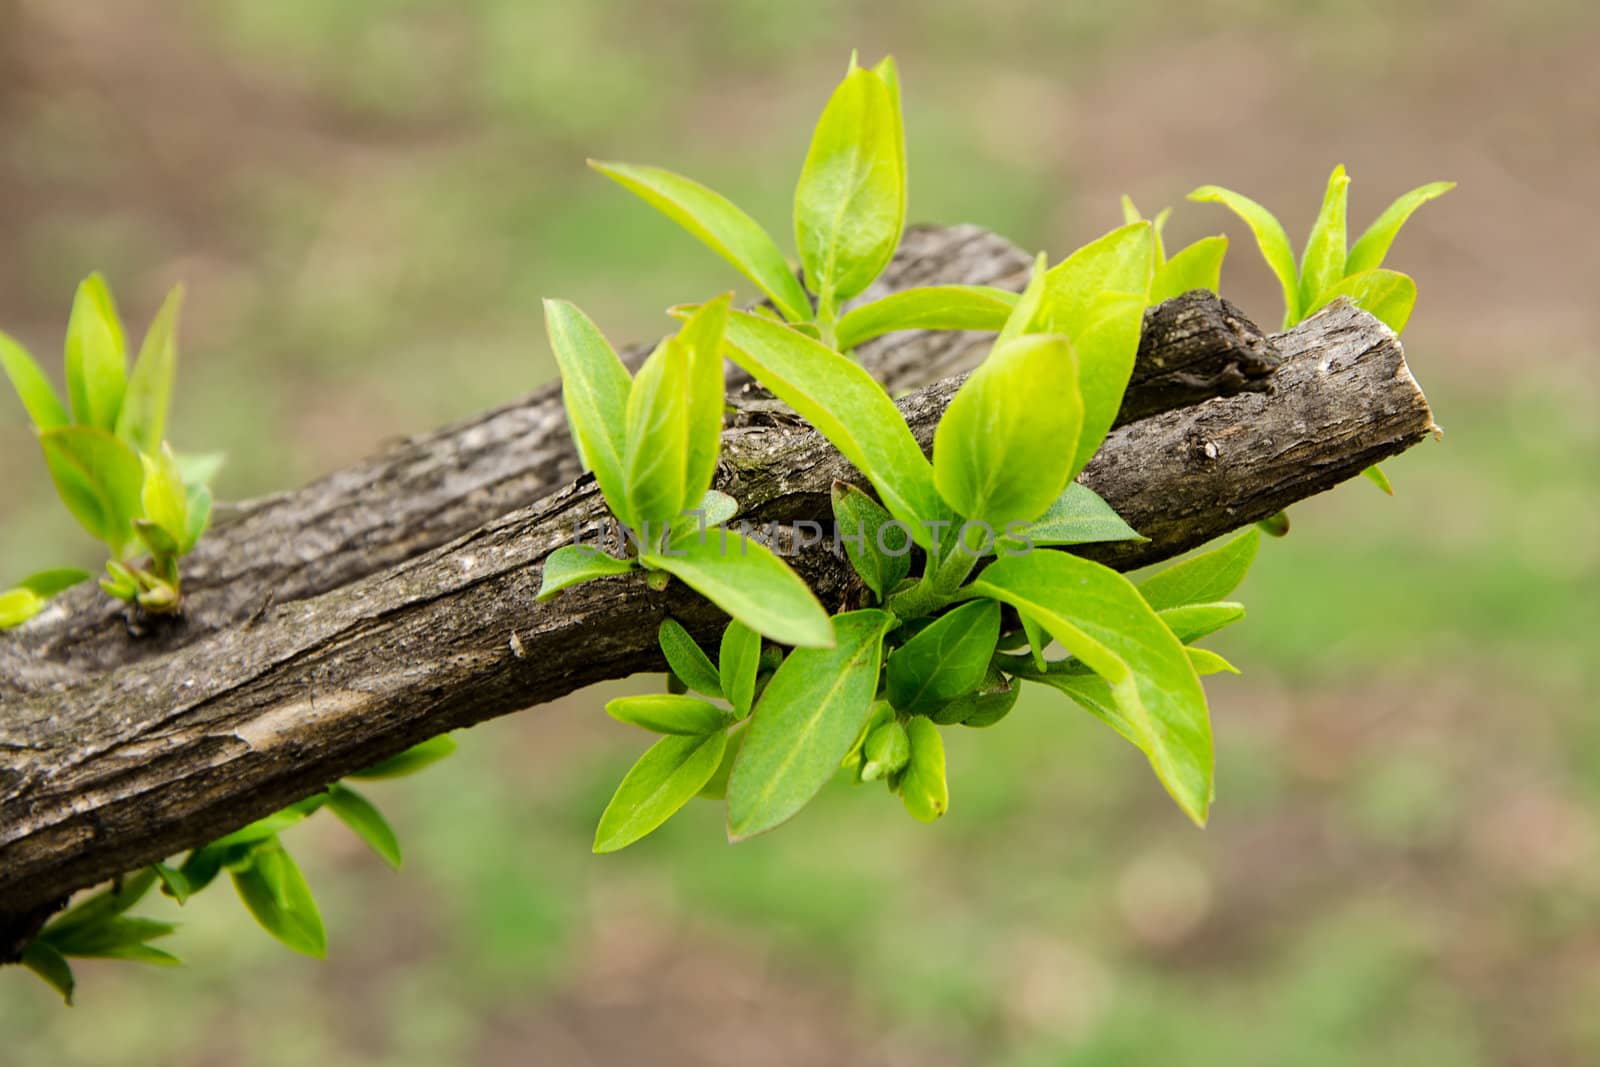 Earliest spring green leaves on old branches by velislava